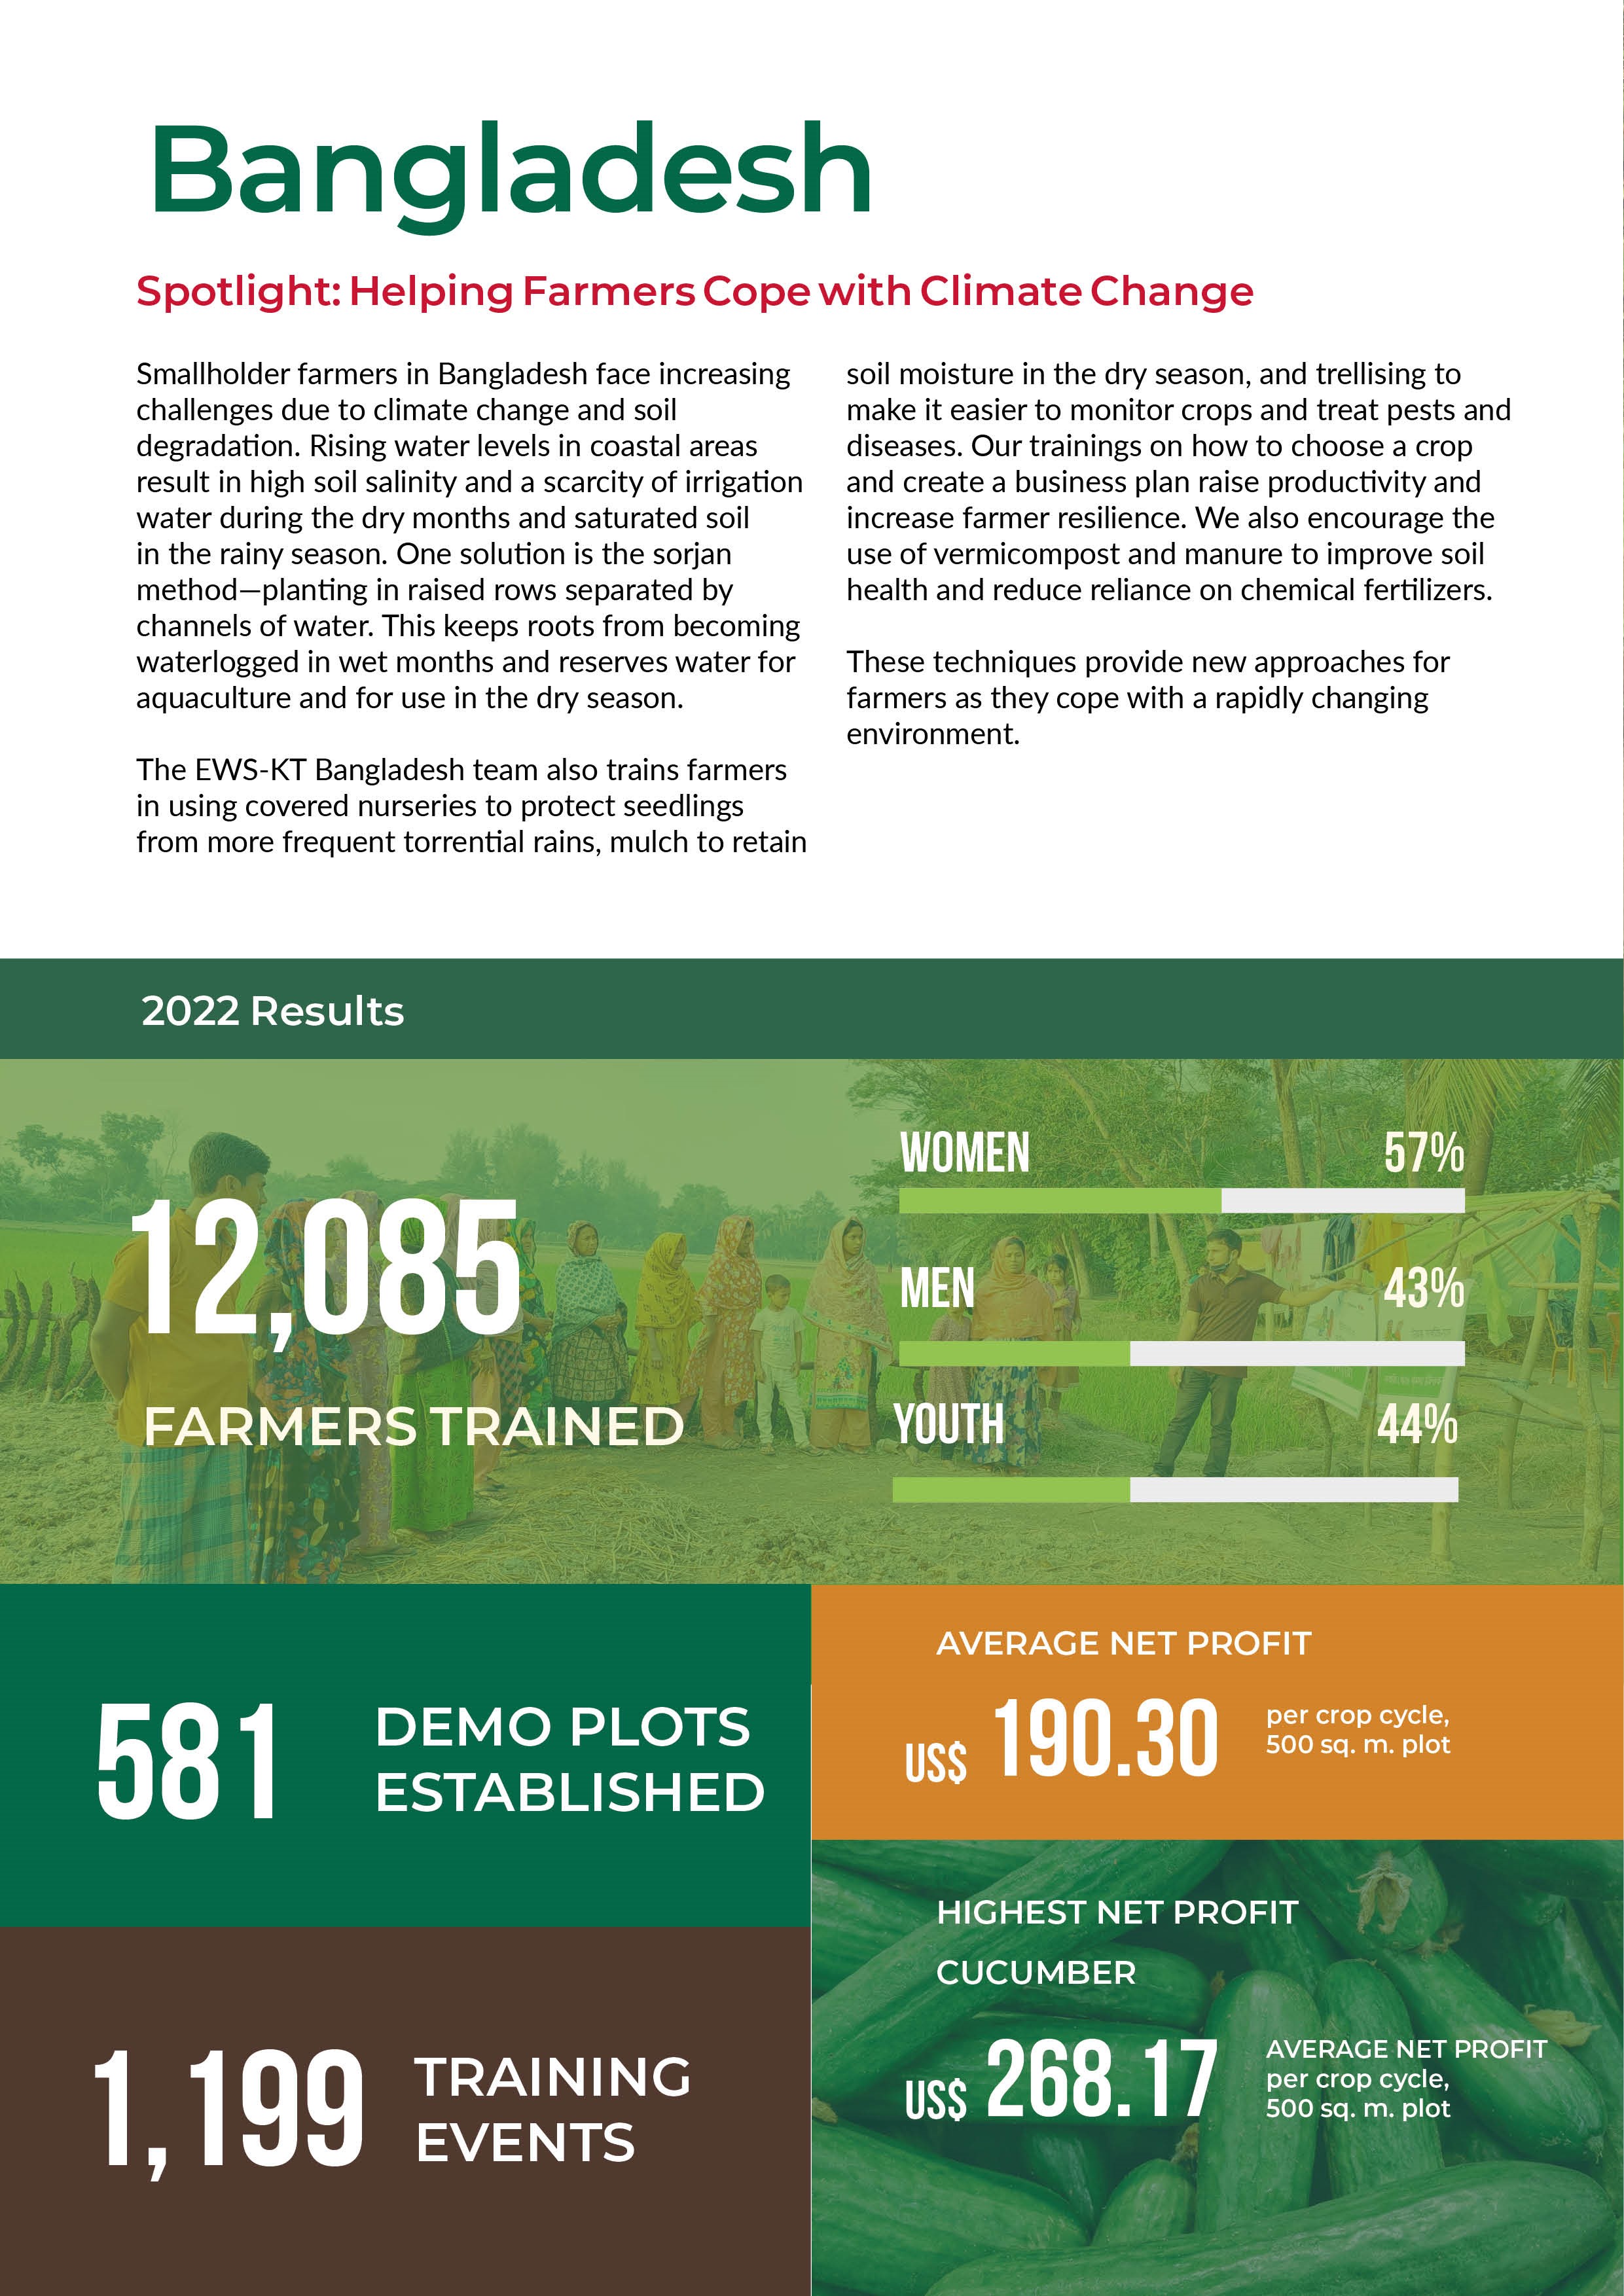 Image of Bangladesh section in 2022 Annual Report